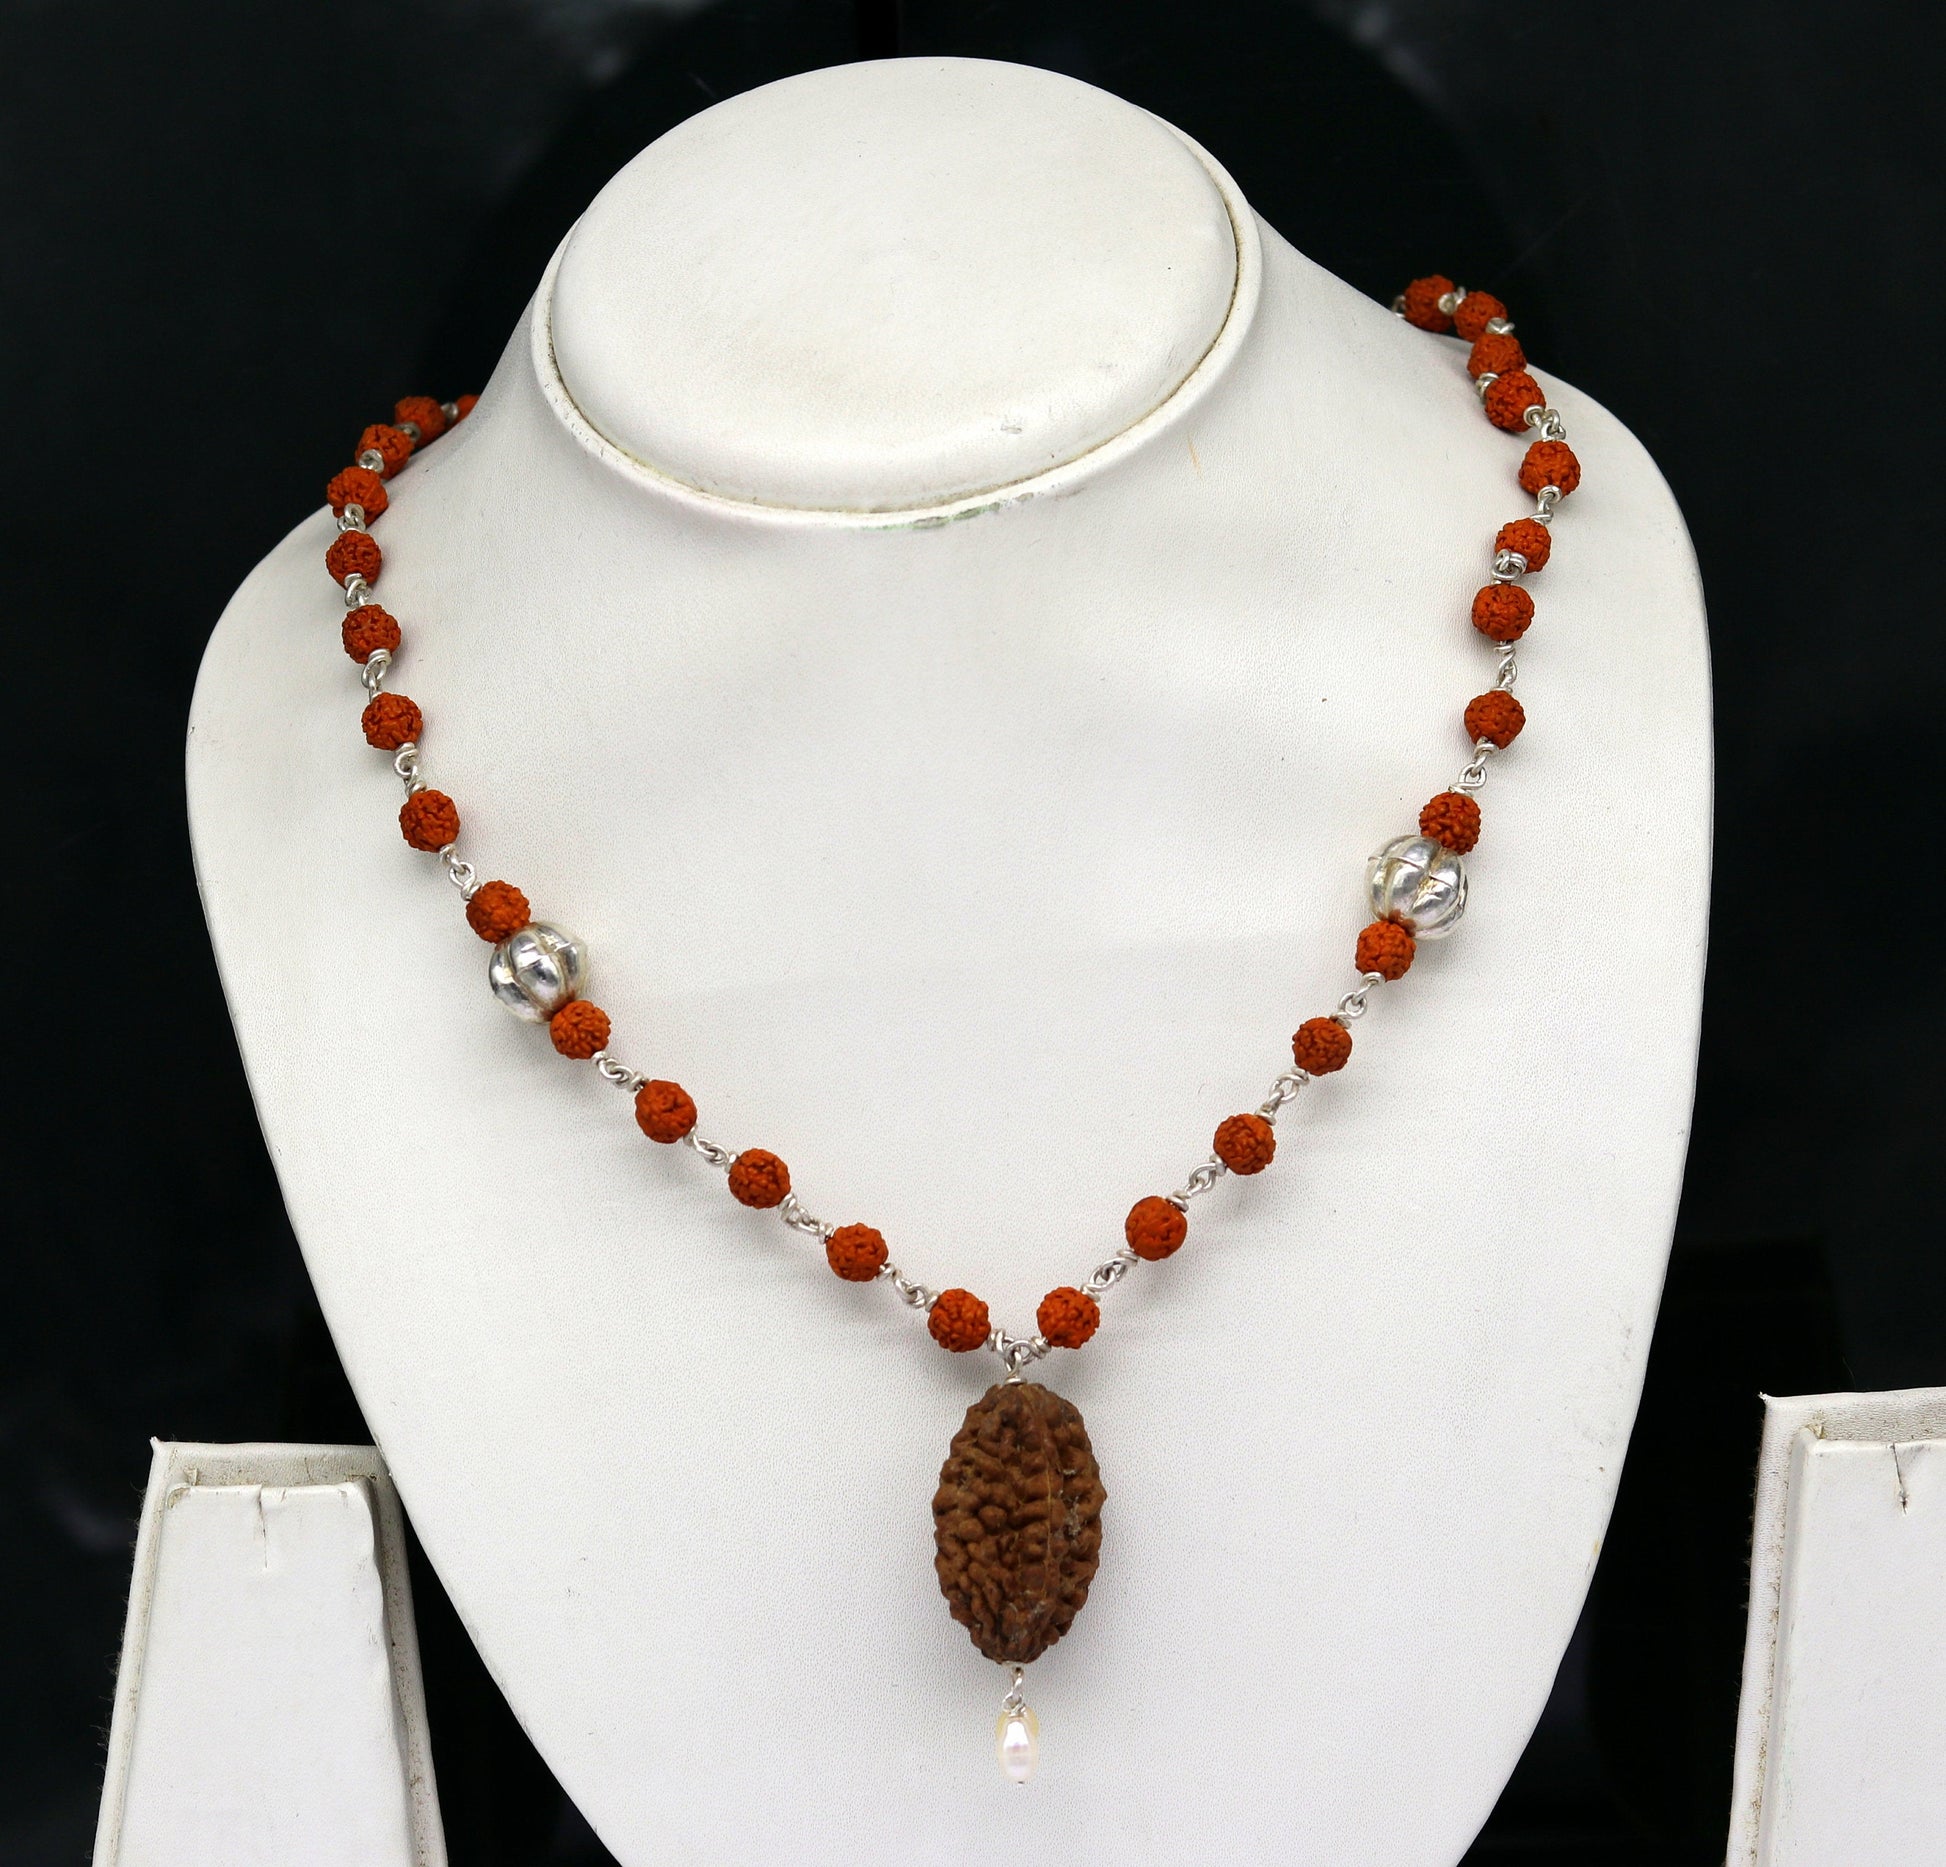 Natural rudraksha beads 20" long necklace, sterling silver chain necklace tribal customized personalized necklace unisex jewelry set127 - TRIBAL ORNAMENTS